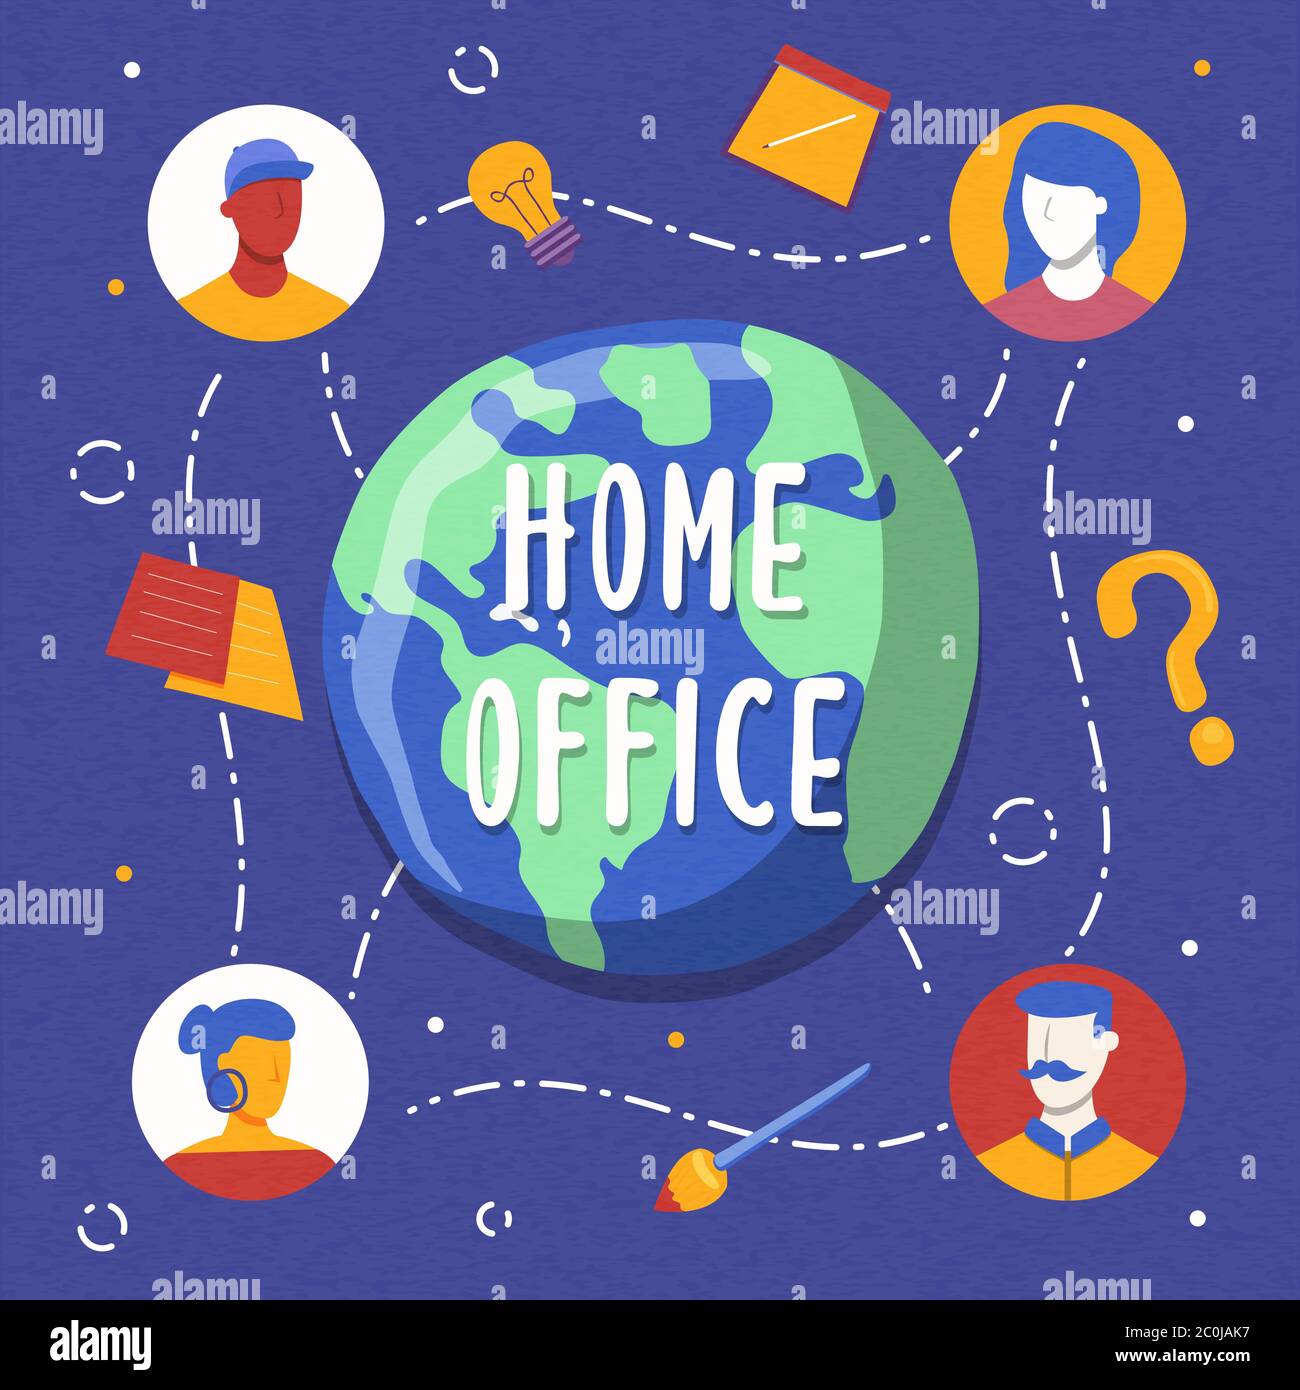 Home office illustration of global work team connected online for business meeting, creative brainstorm or job communication concept. Stock Vector